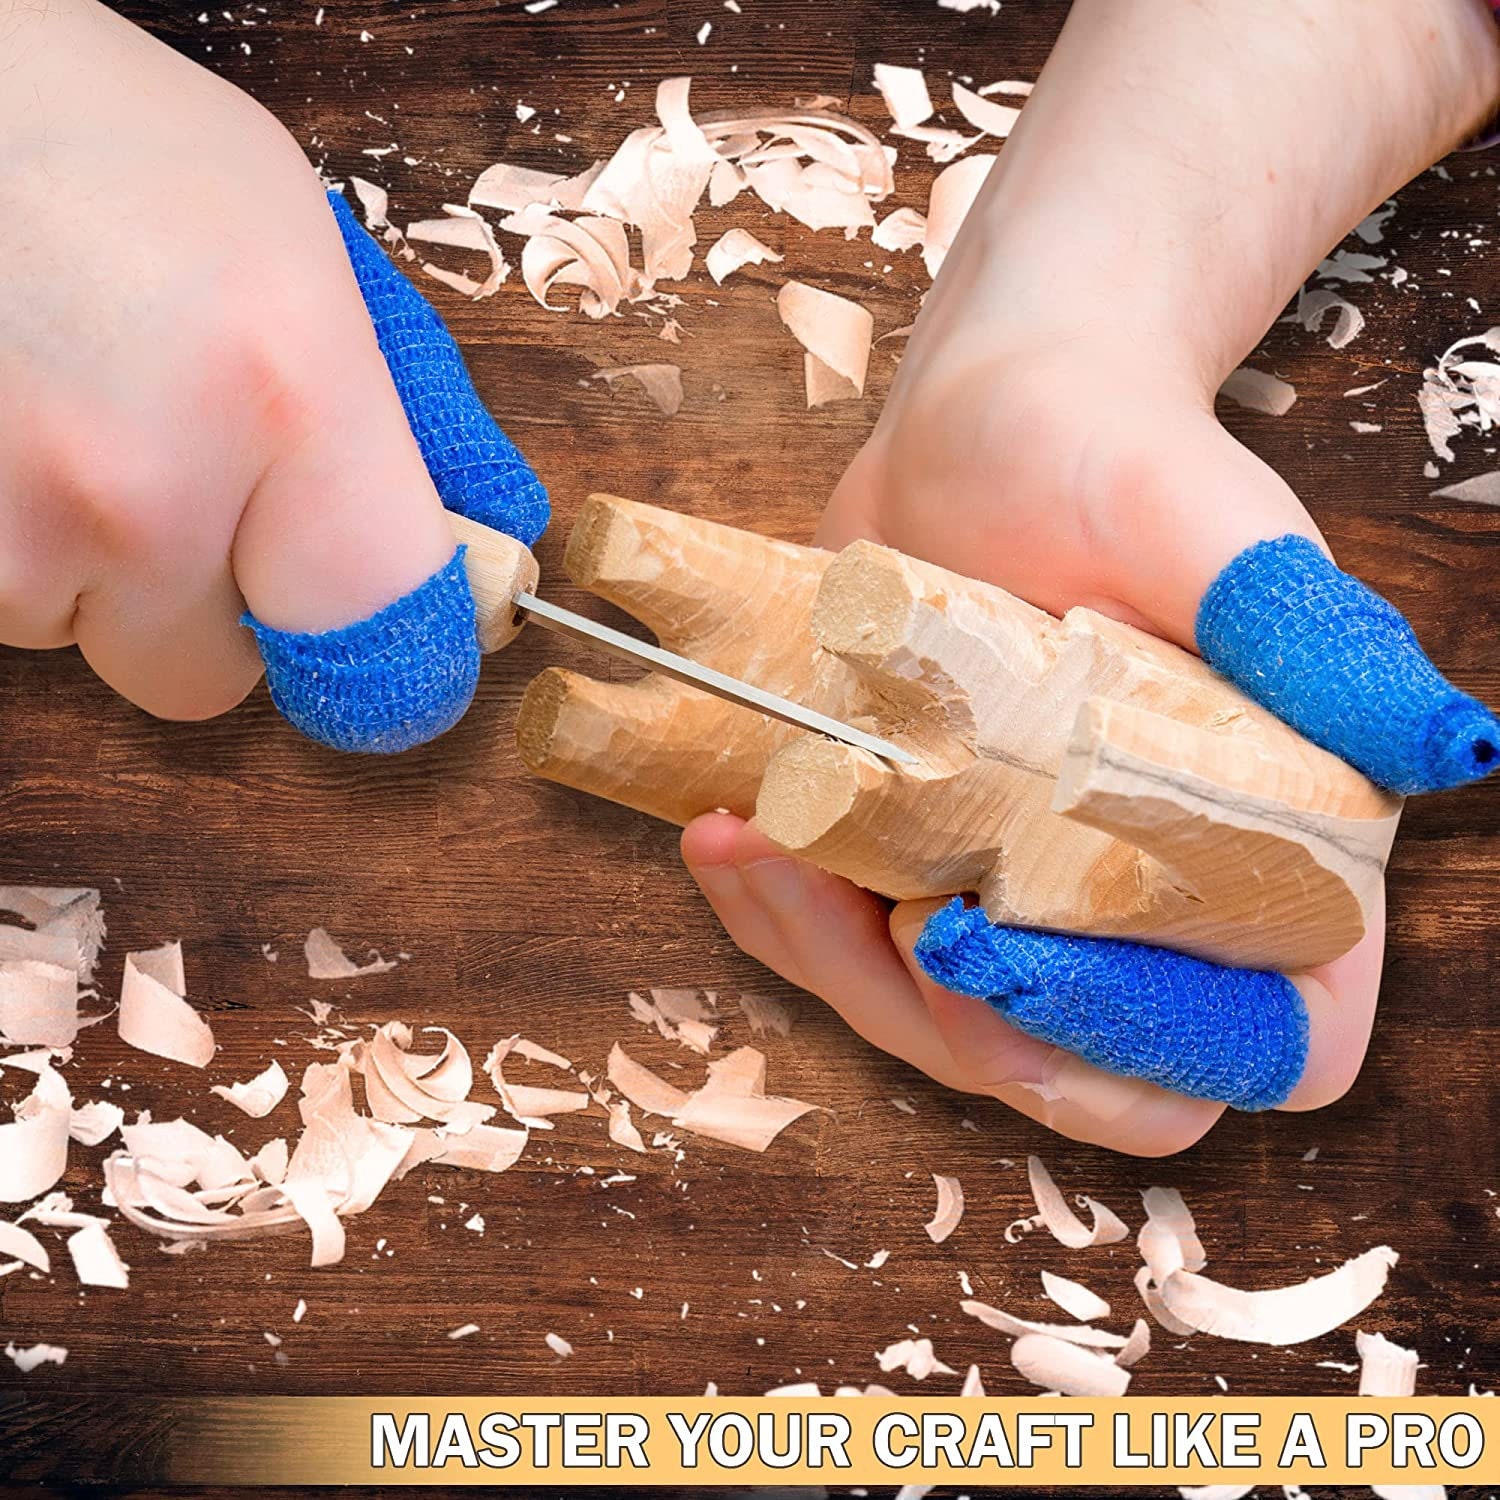 Wood Carving Kit for Beginners - Whittling kit with Rhino - Linden